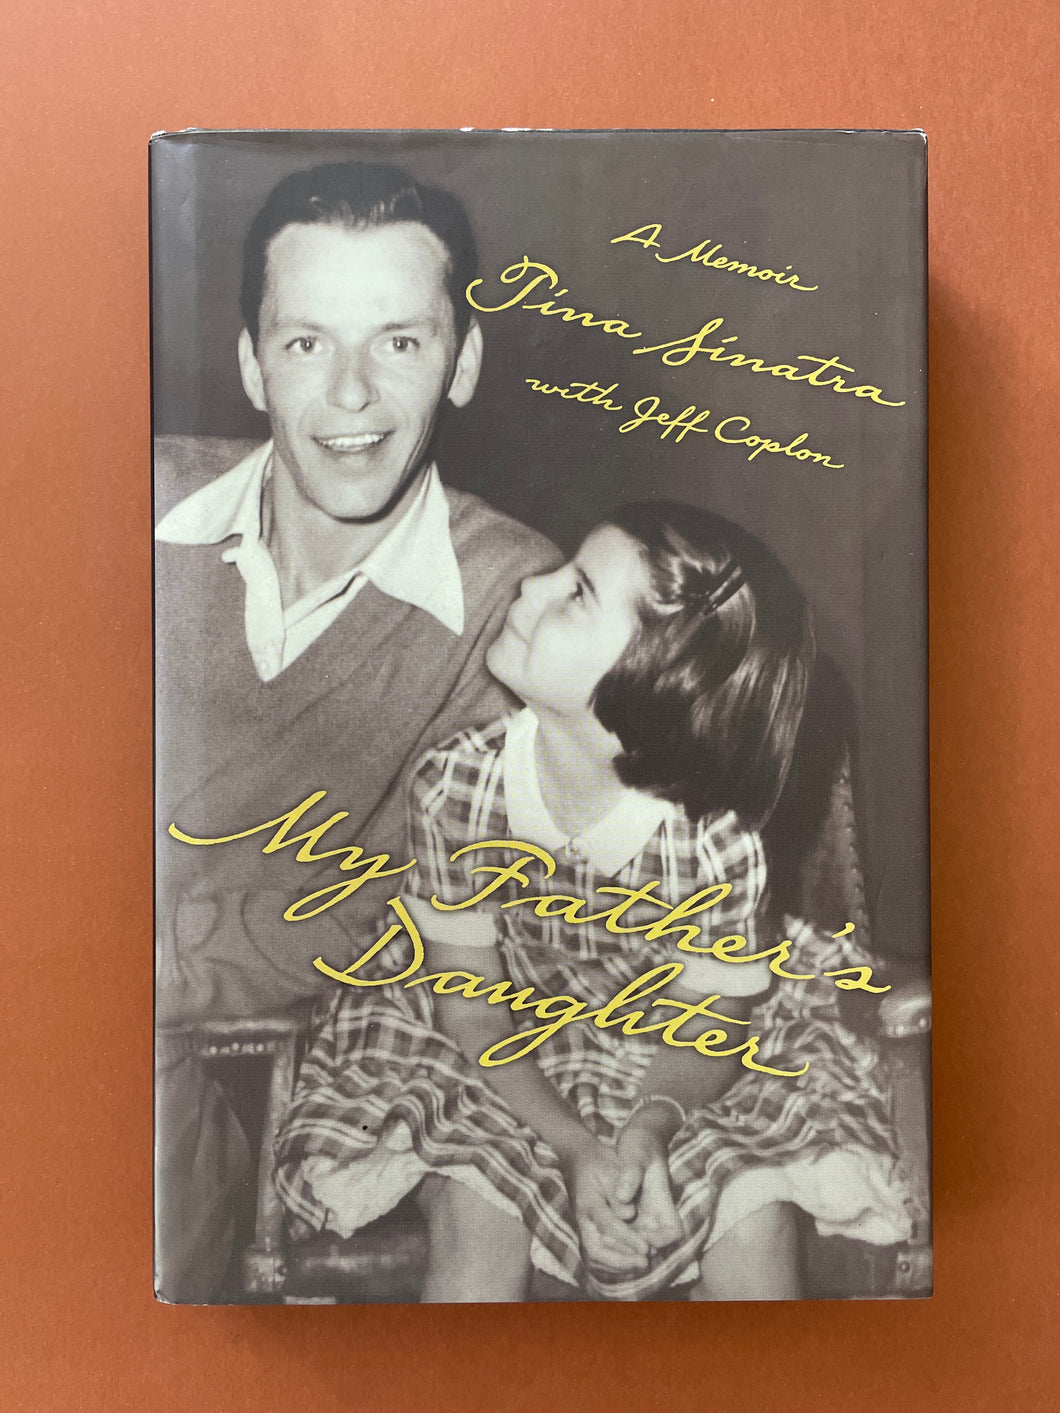 My Father's Daughter by Tina Sinatra: photo of the front cover which shows very minor scuff marks along the edges.